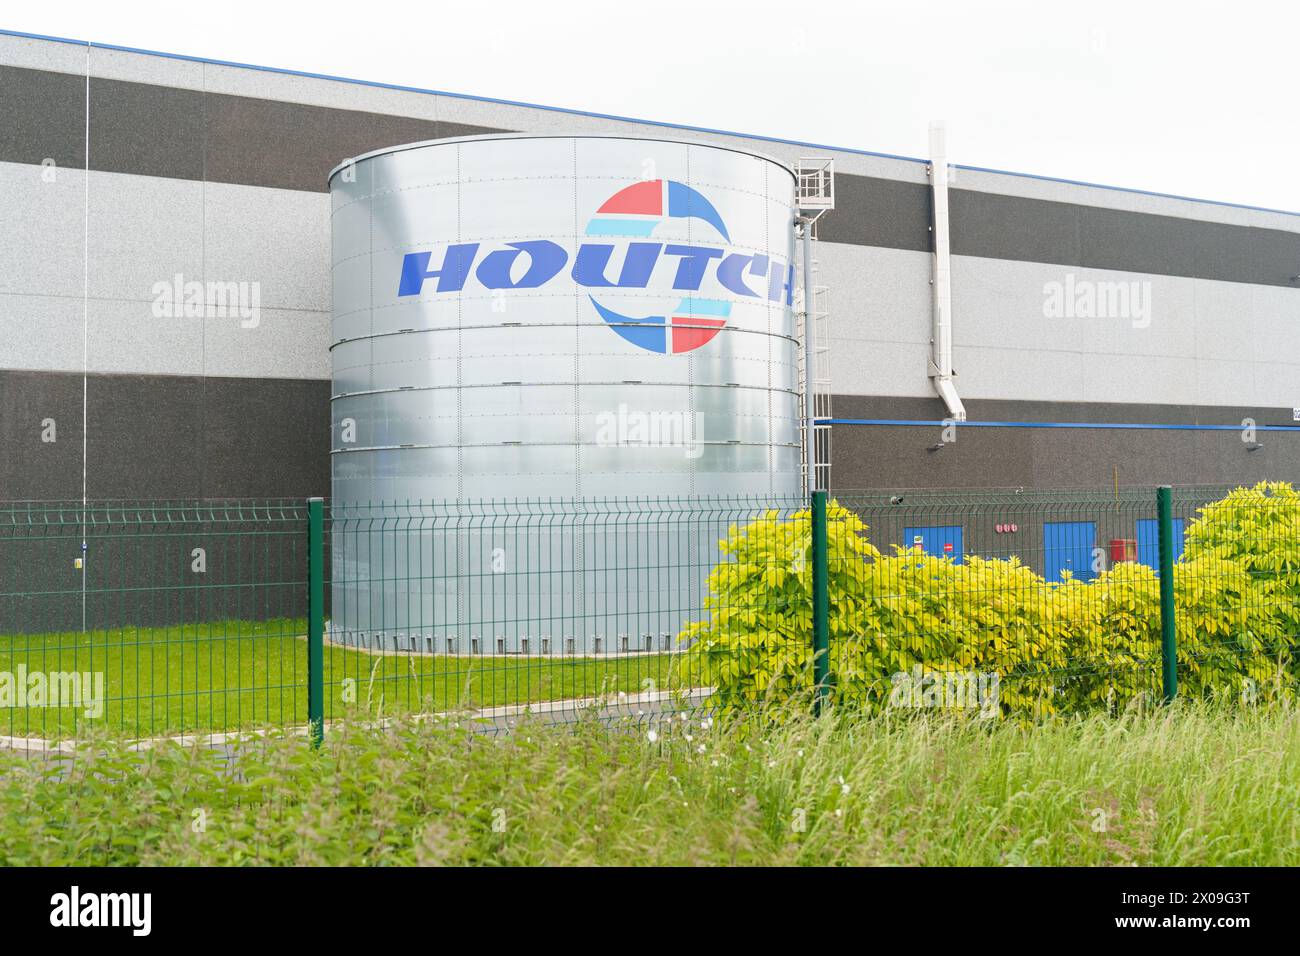 Cambrai, France - May 21, 2023: A large storage tank with the Houlihans logo stands prominently in an industrial setting, surrounded by lush greenery Stock Photo